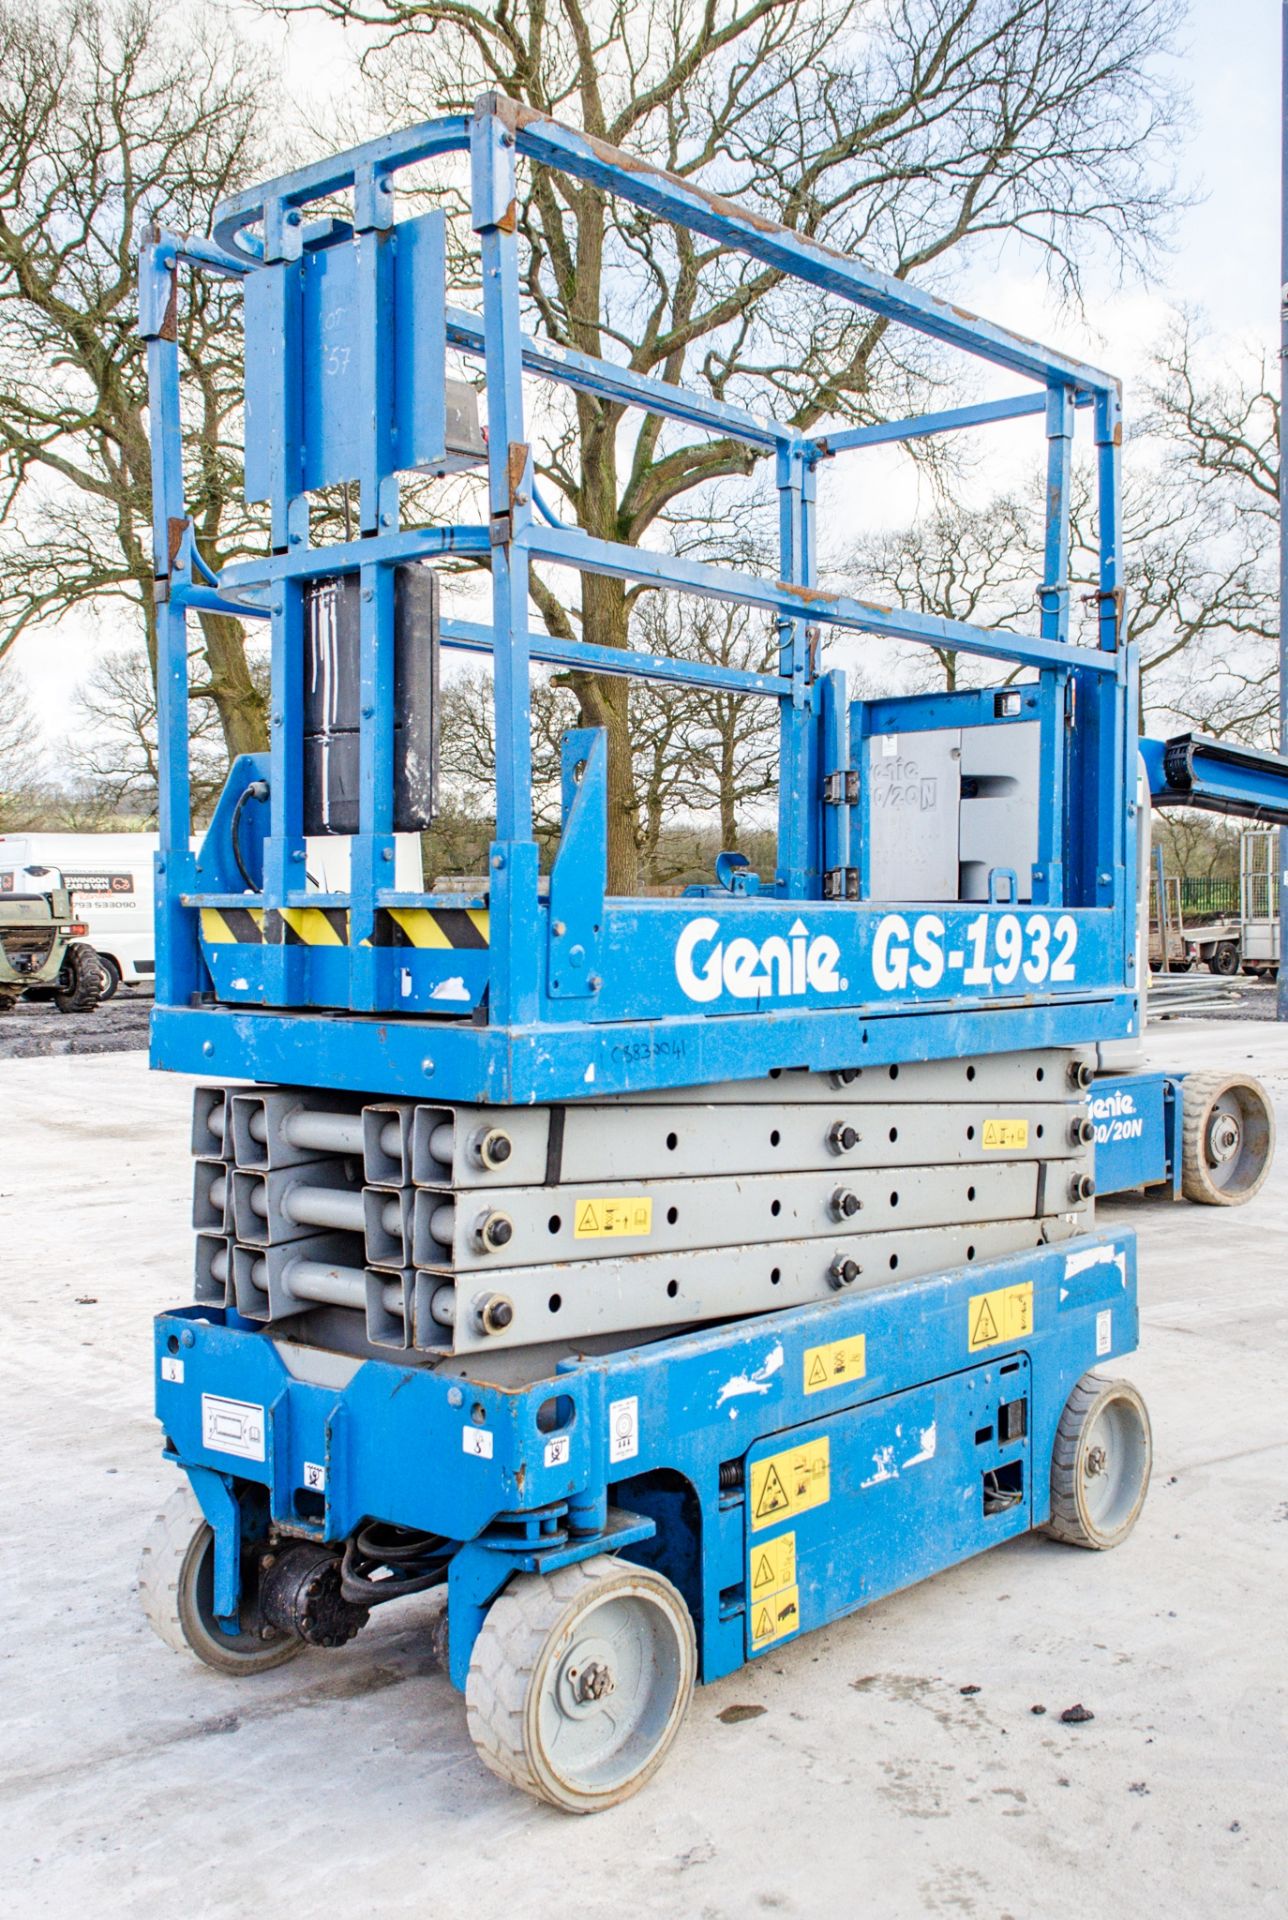 Genie GS1932 battery electric scissor lift access platform Year: 2007 S/N: 91067 Recorded Hours: 306